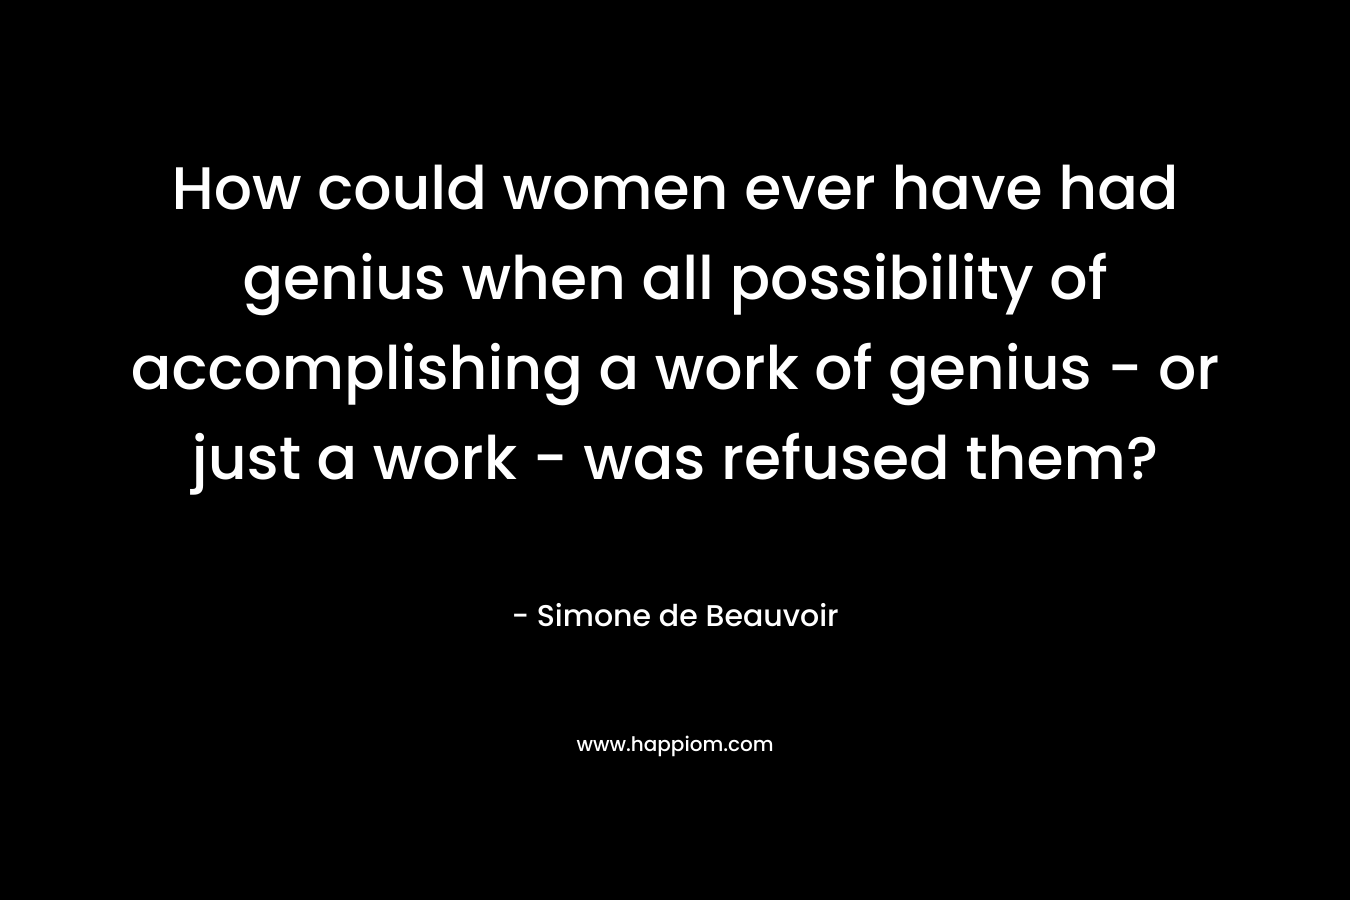 How could women ever have had genius when all possibility of accomplishing a work of genius - or just a work - was refused them?